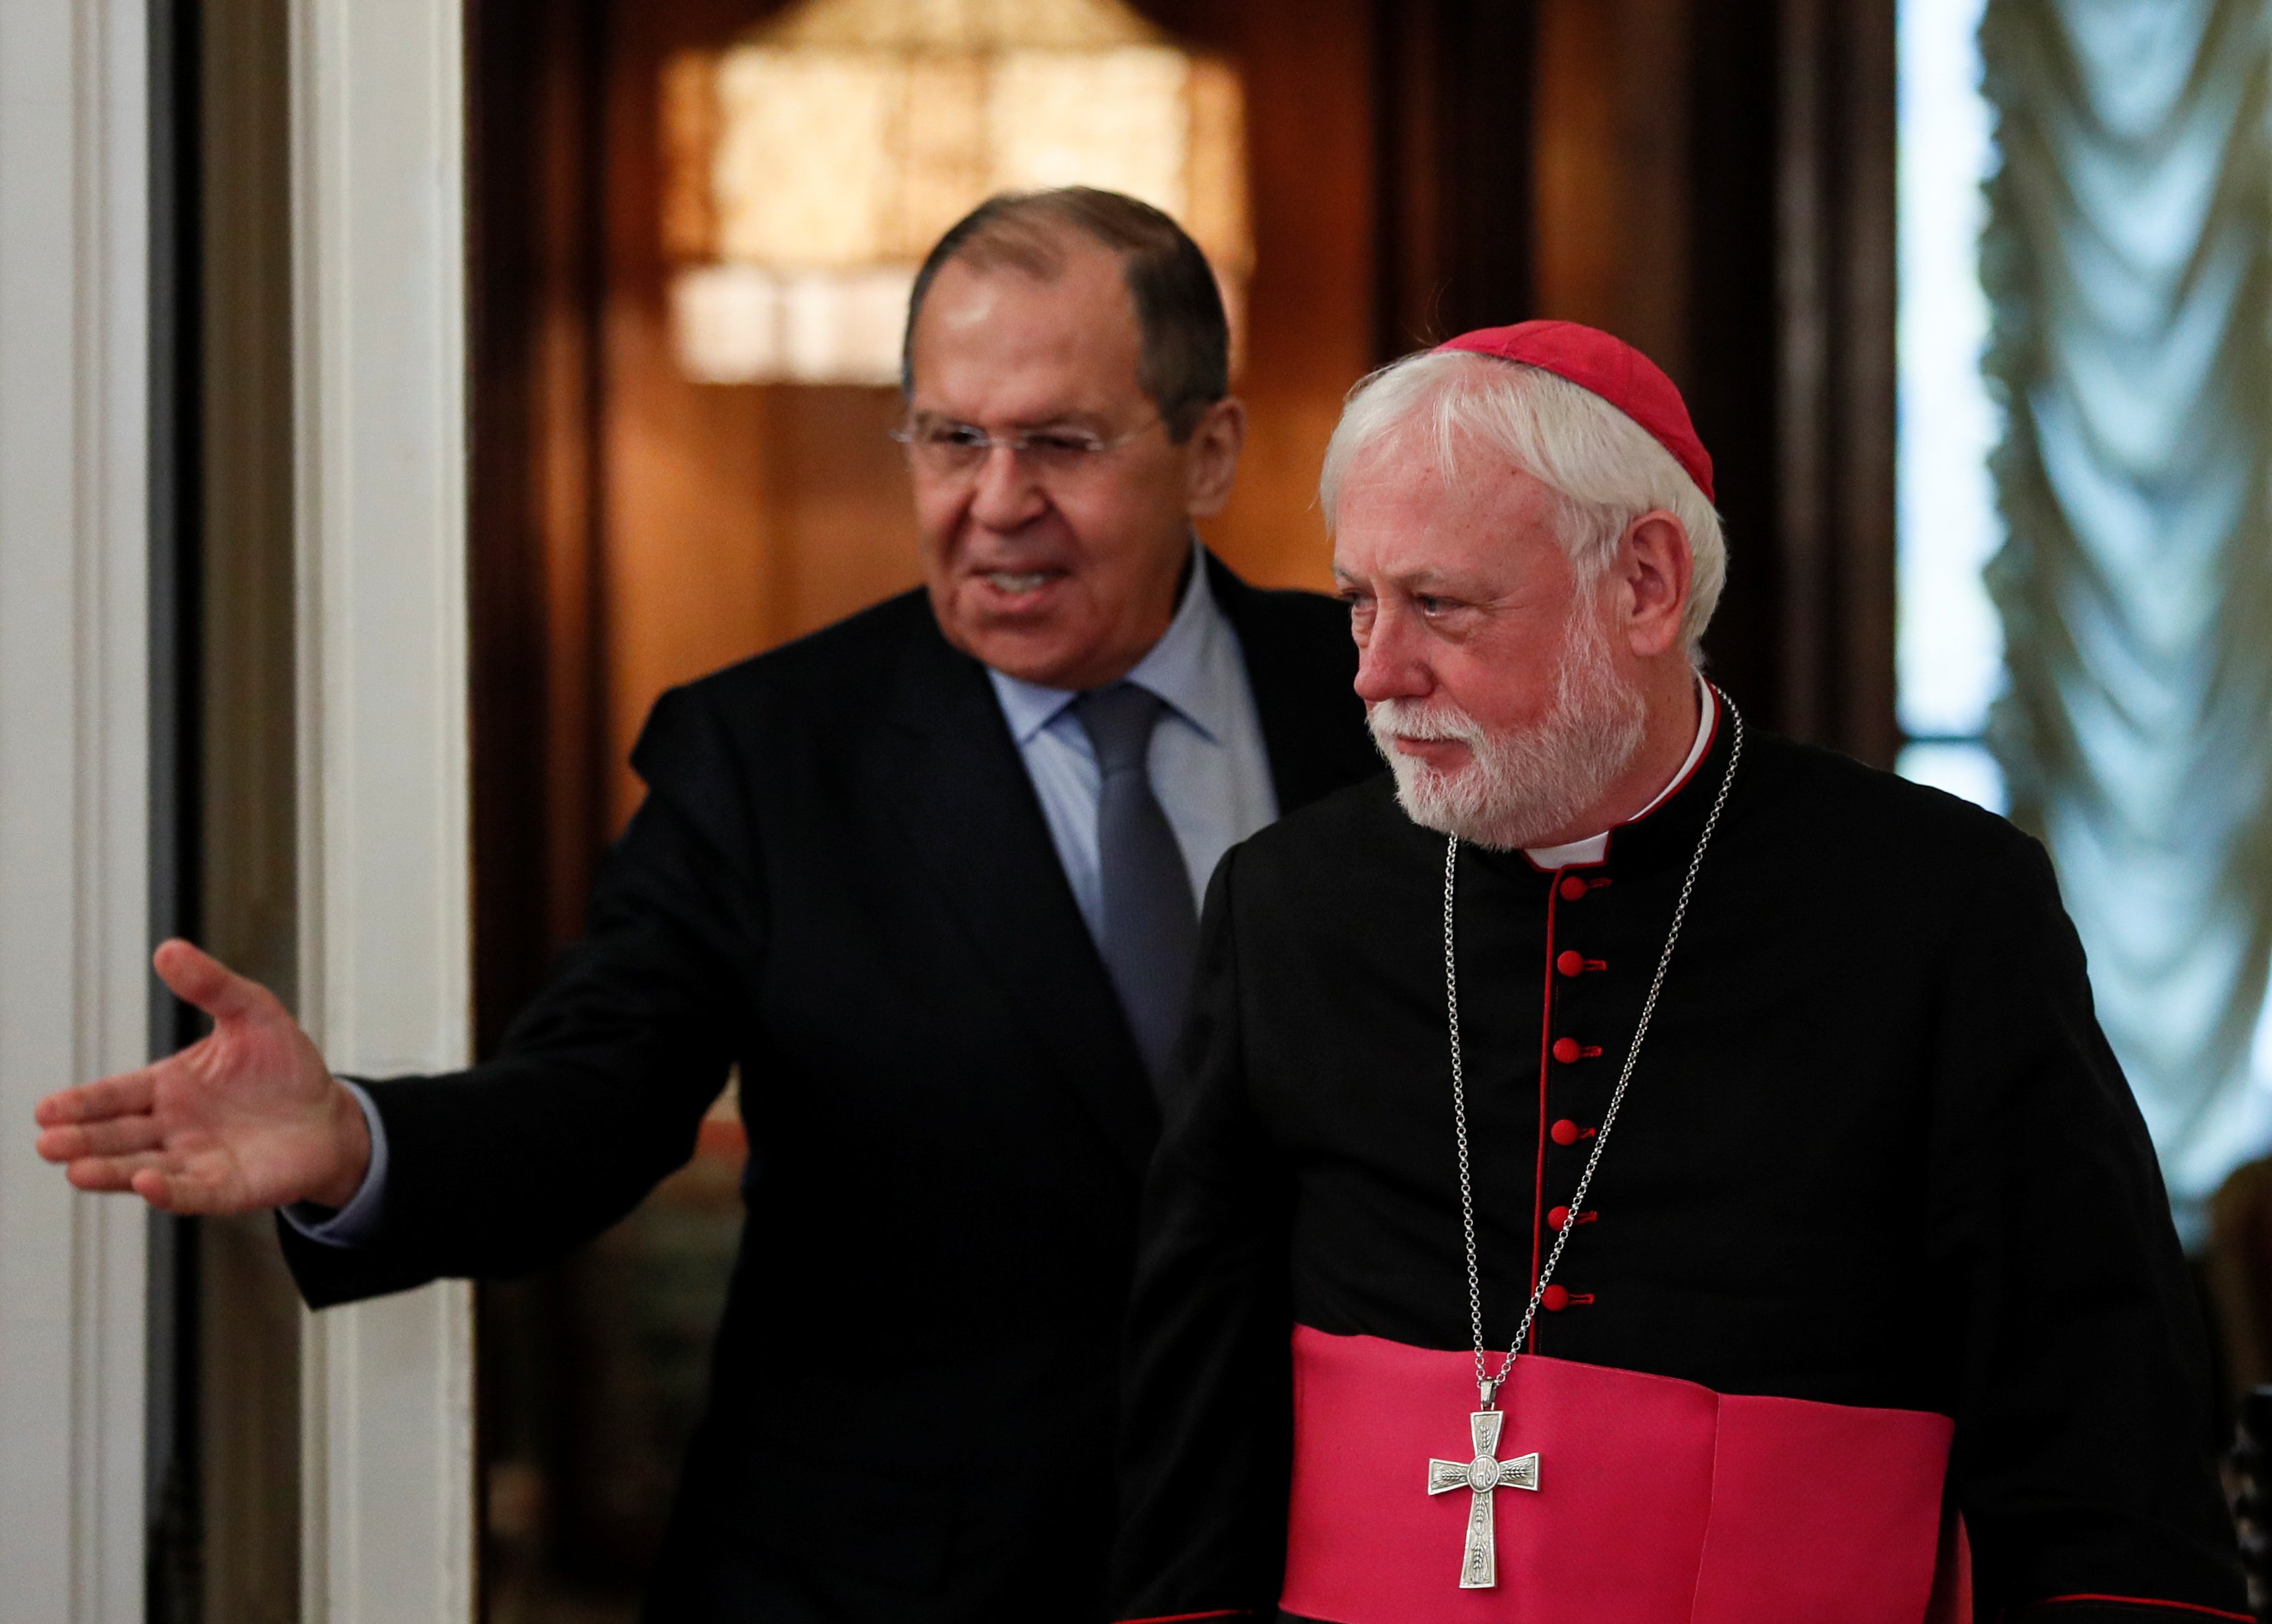 Russian Foreign Minister Sergei Lavrov enters a hall with Archbishop Paul Gallagher, Vatican secretary for relations with states, during their meeting in Moscow Nov. 9, 2021. (CNS photo/Yuri Kochetkov, pool via Reuters)